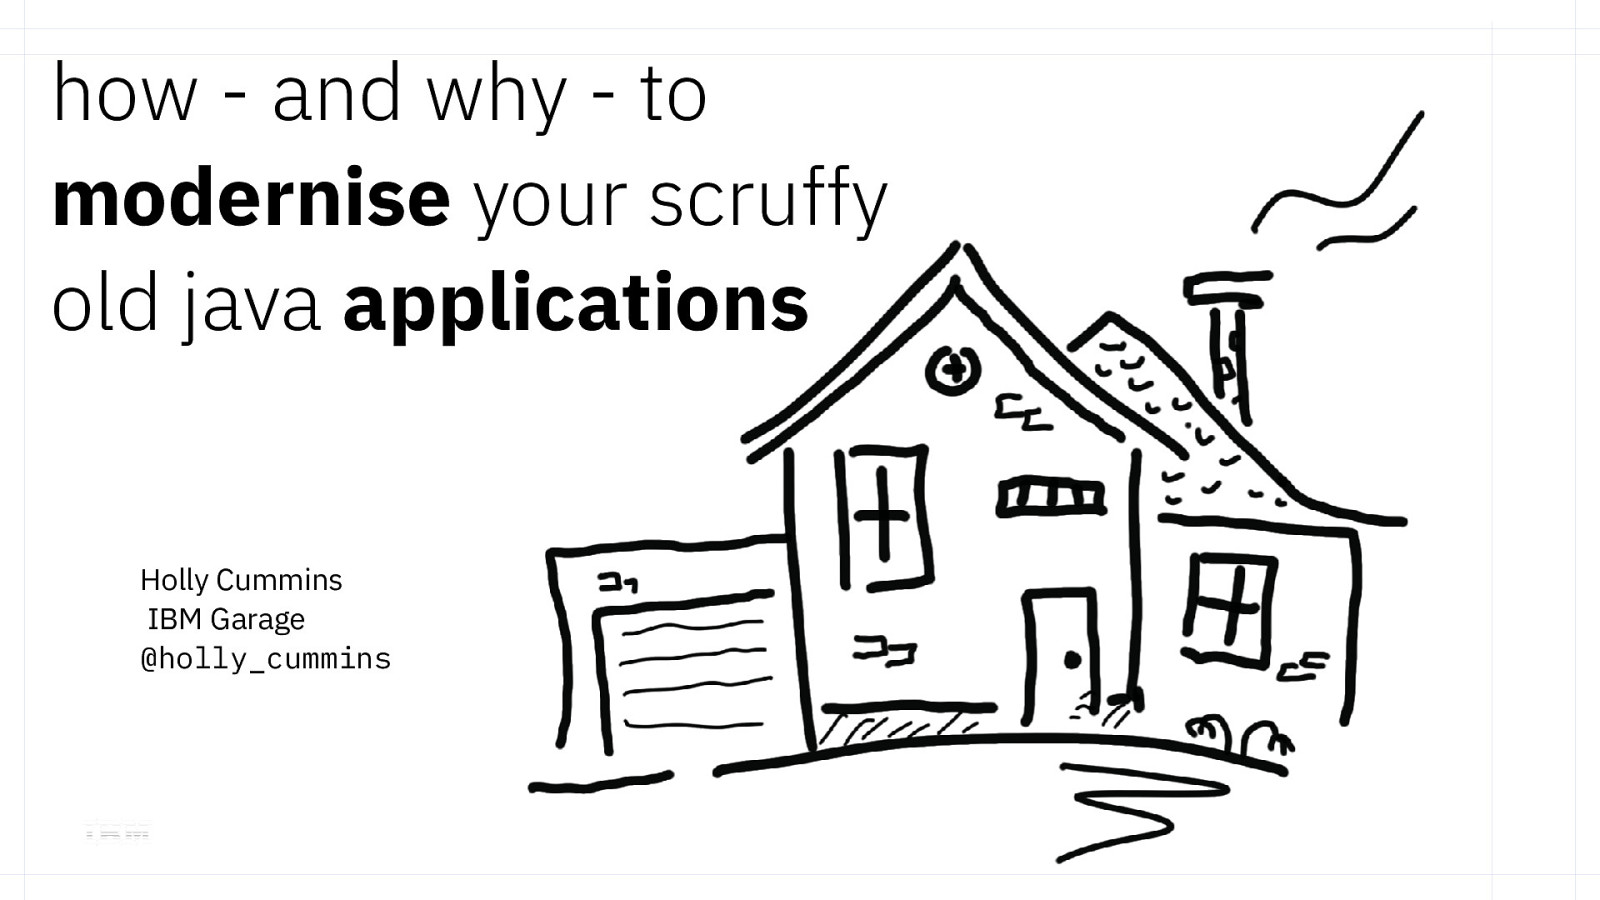 How - and why - to modernize your scruffy old Java applications